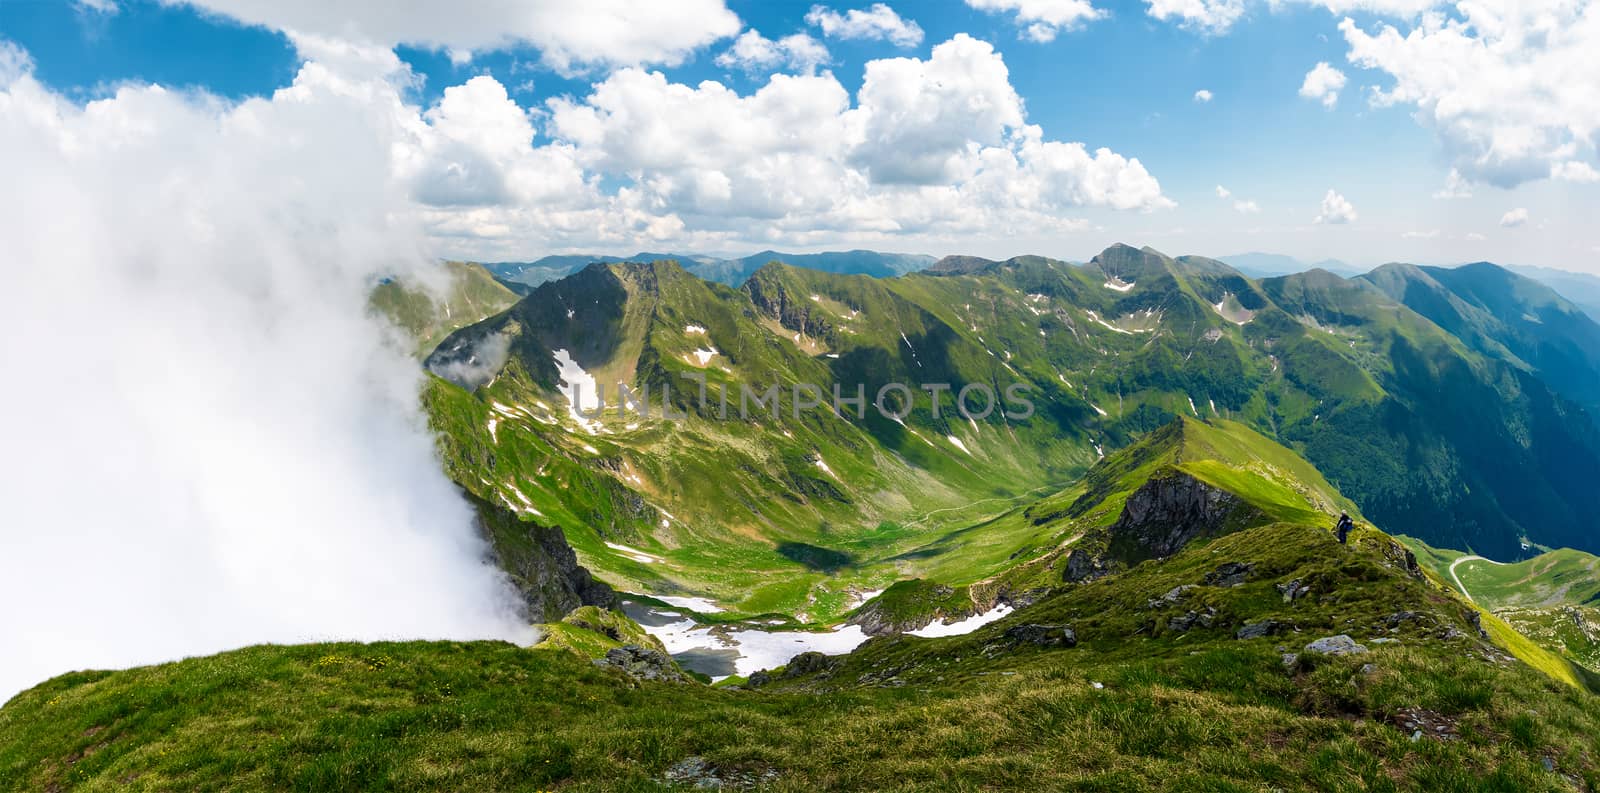 mountainous panorama with rising clouds. beautiful landscape with some snow on grassy hillsides. popular destination for hiking in Fagaras mountains of Romania